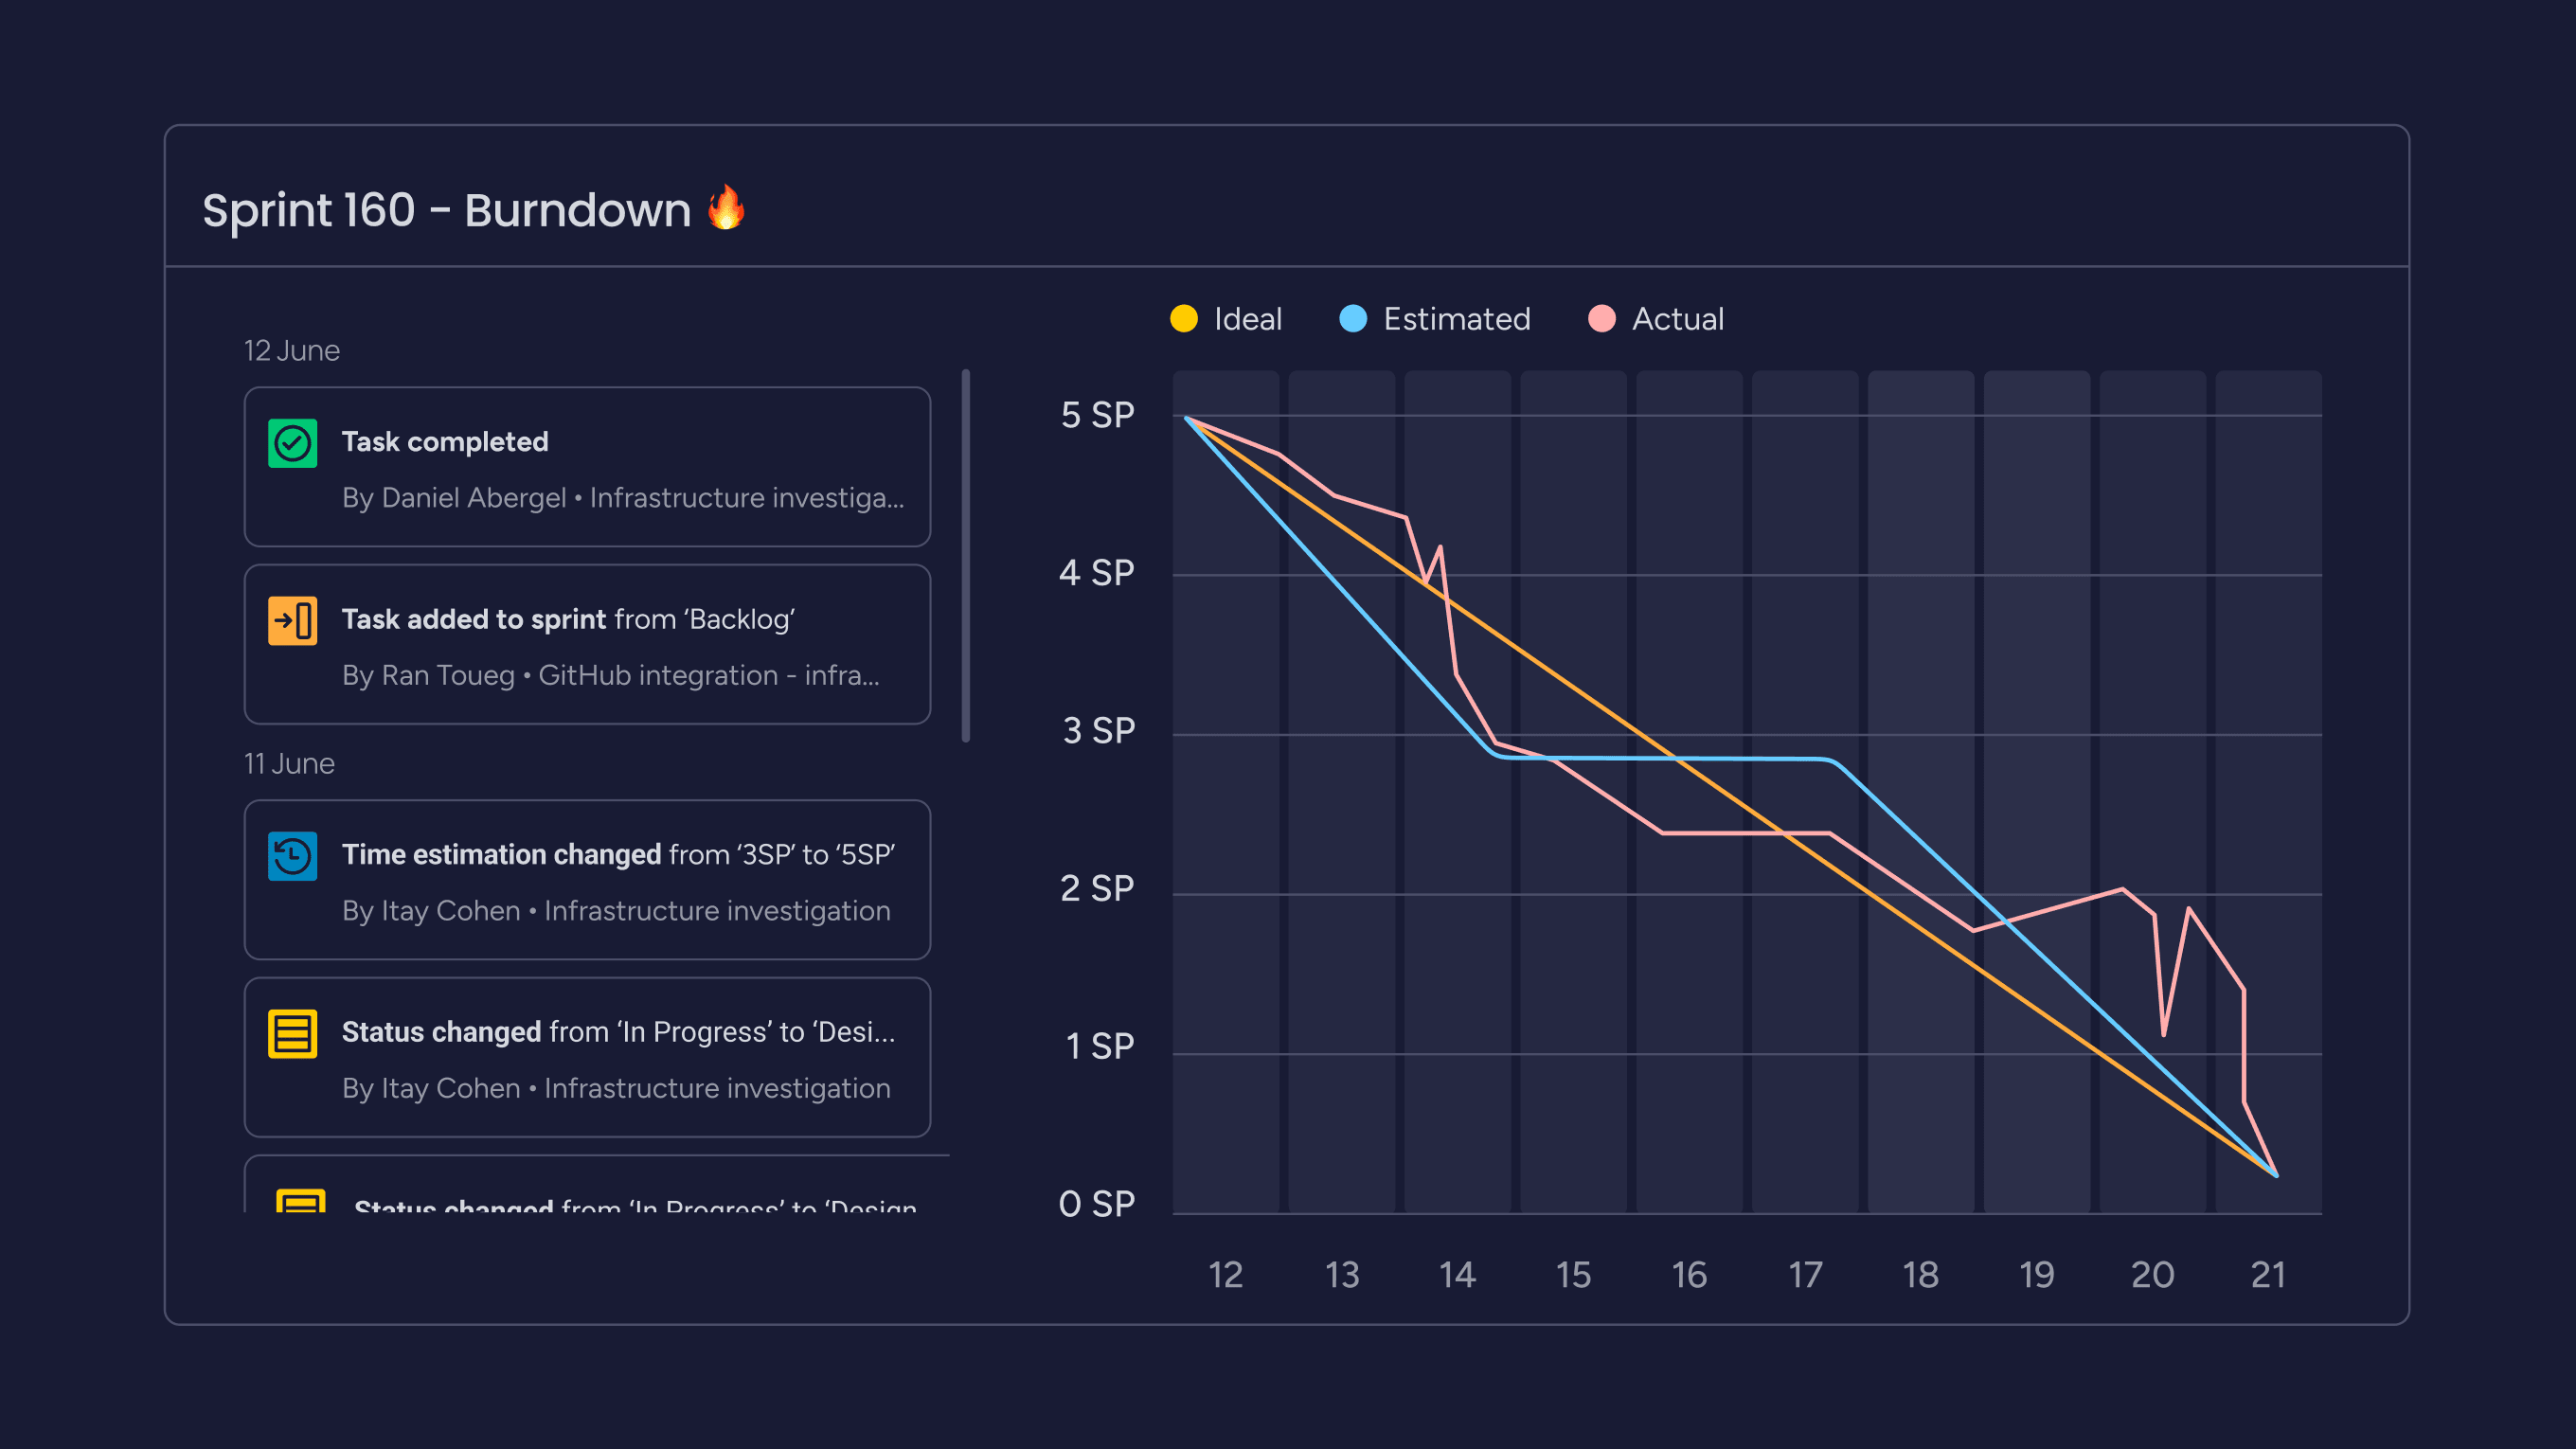 Use the burndown chart to detect any potential problems or bottlenecks based on the actual progress against the ideal progress in your Scrum board.